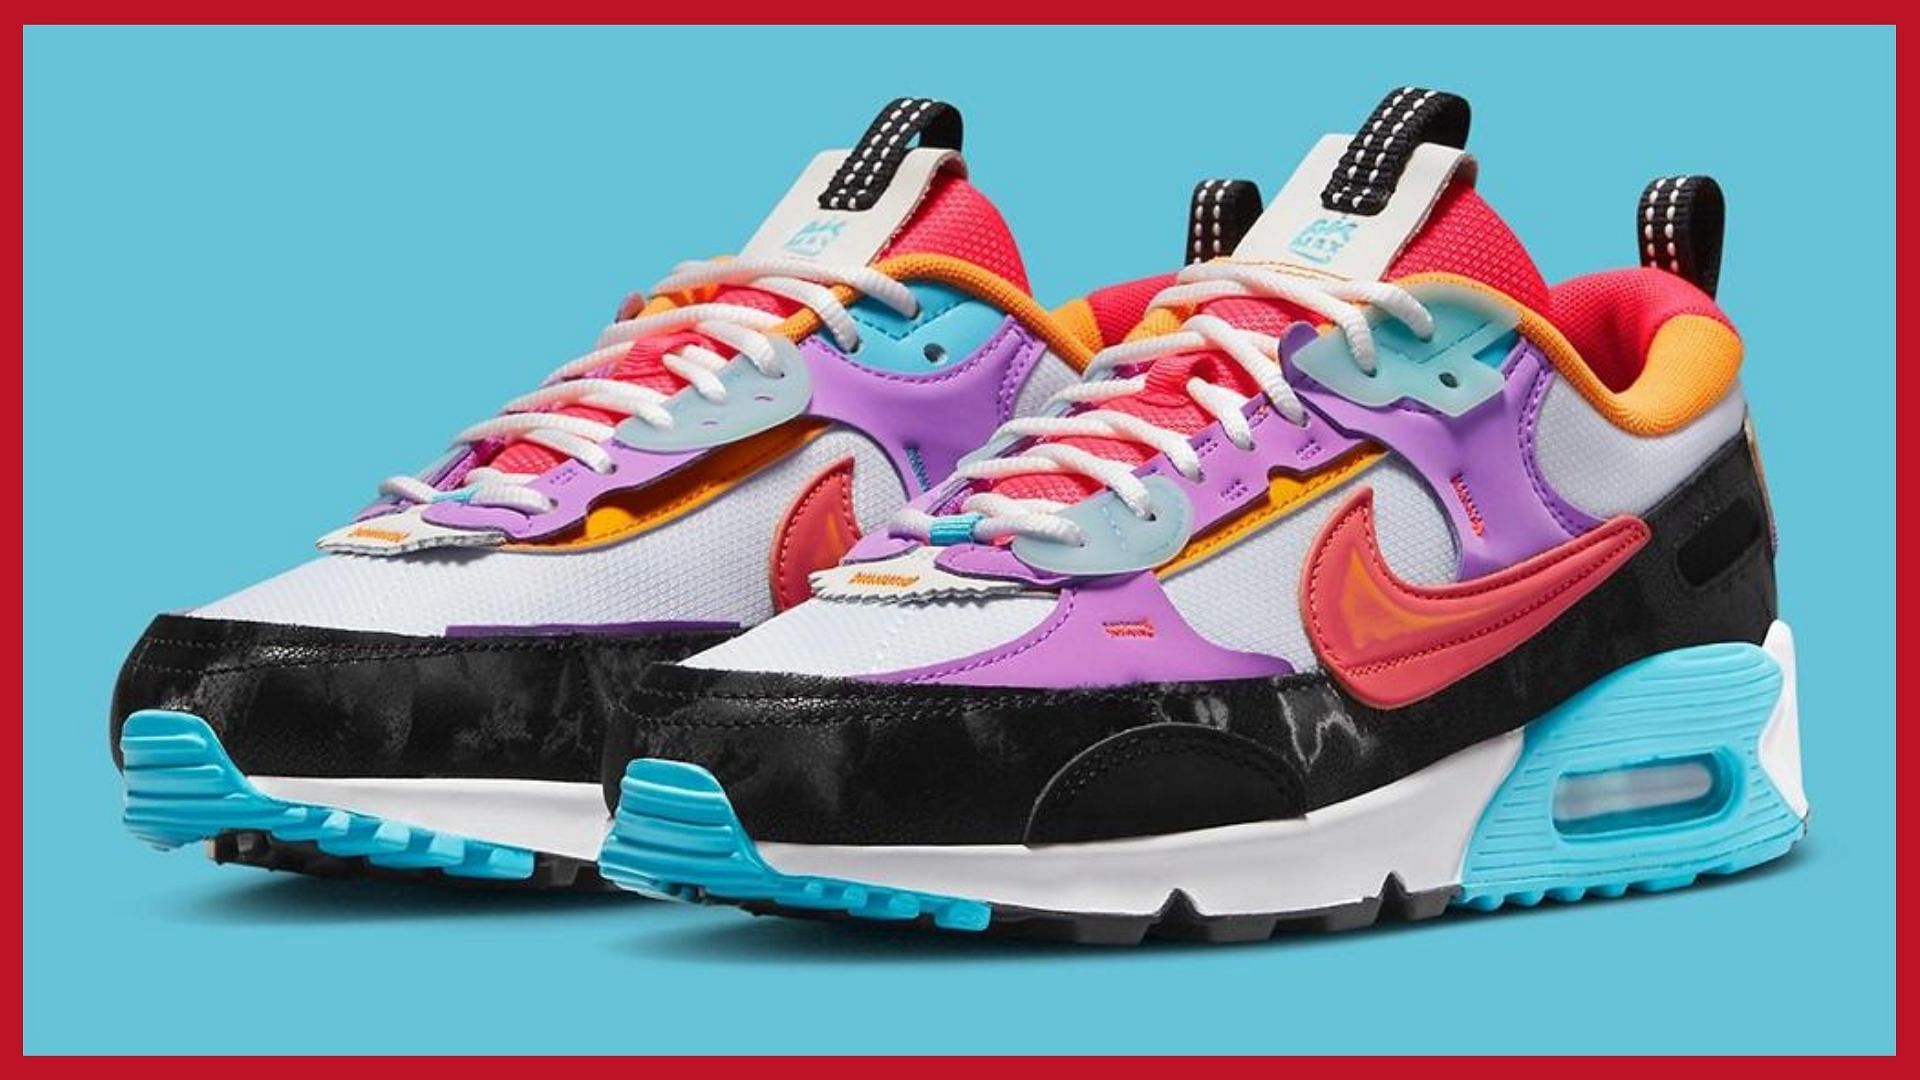 Where to buy Nike Max Futura “Lunar New Year” edition? Price and more details explored